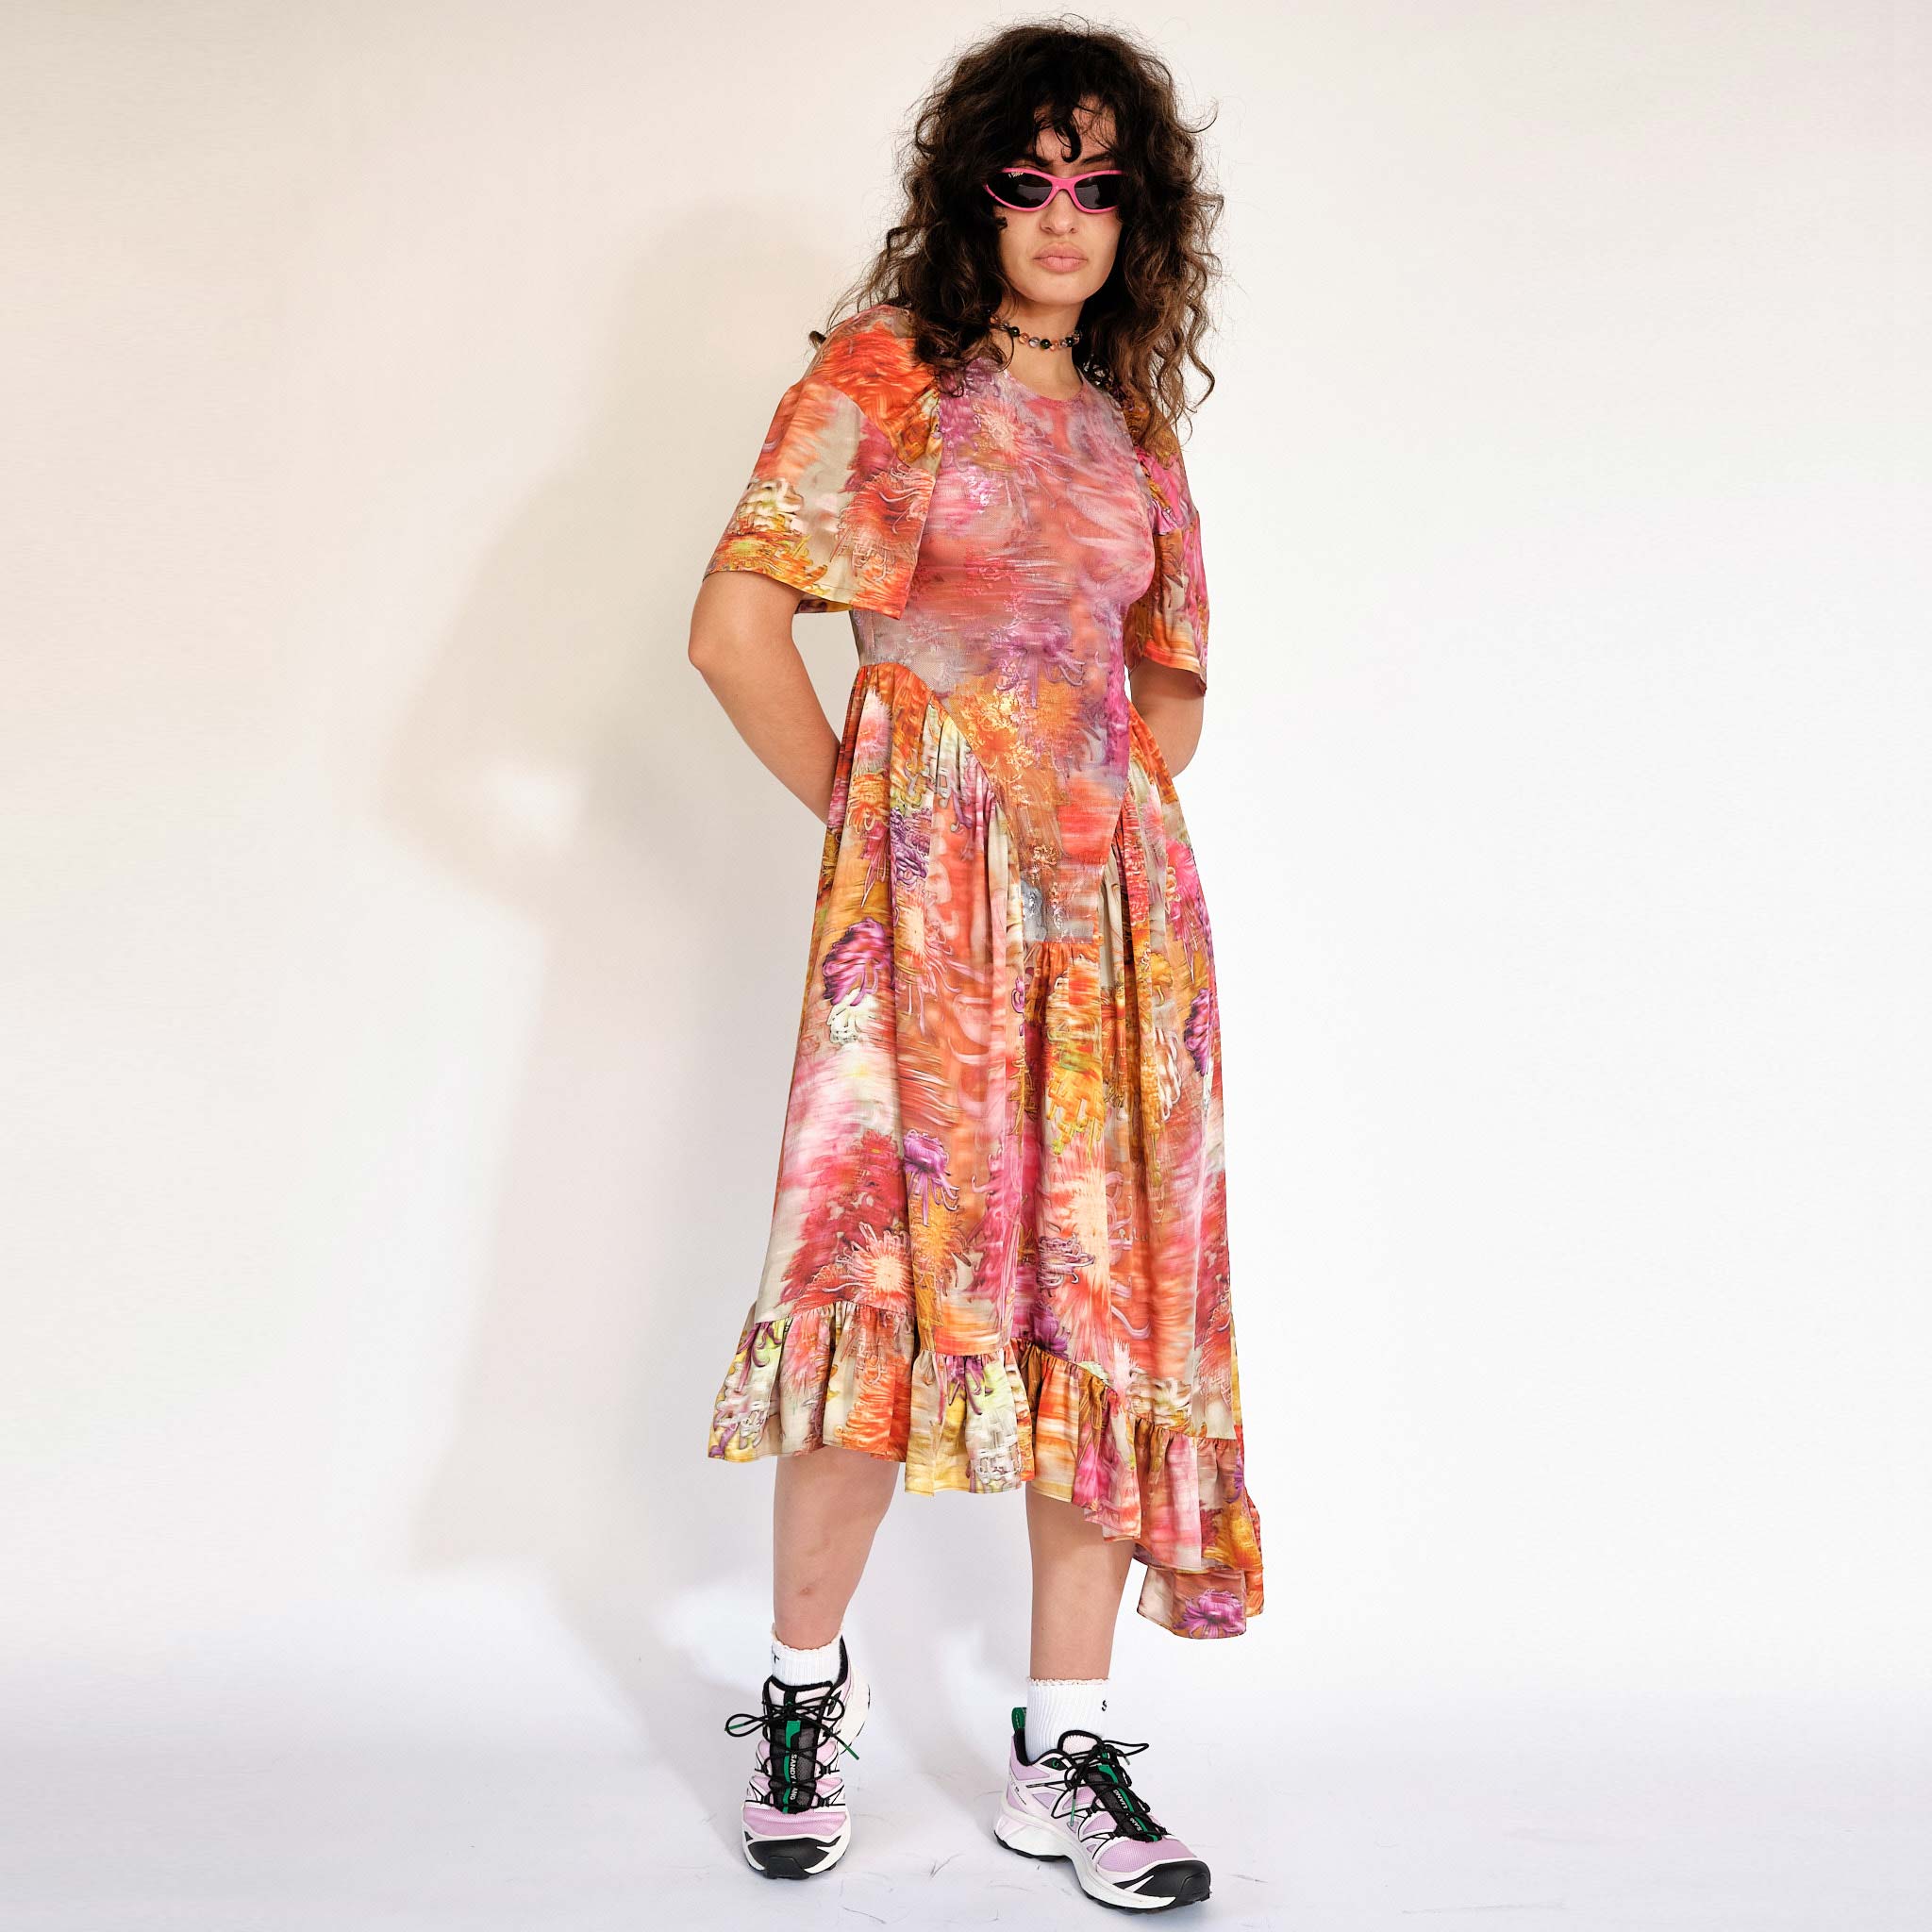 A model wears the Pollinate Dress in Chrysanthemum - multicolored floral dress with short bell sleeves and an asymmetrical ruffled hem - front view.